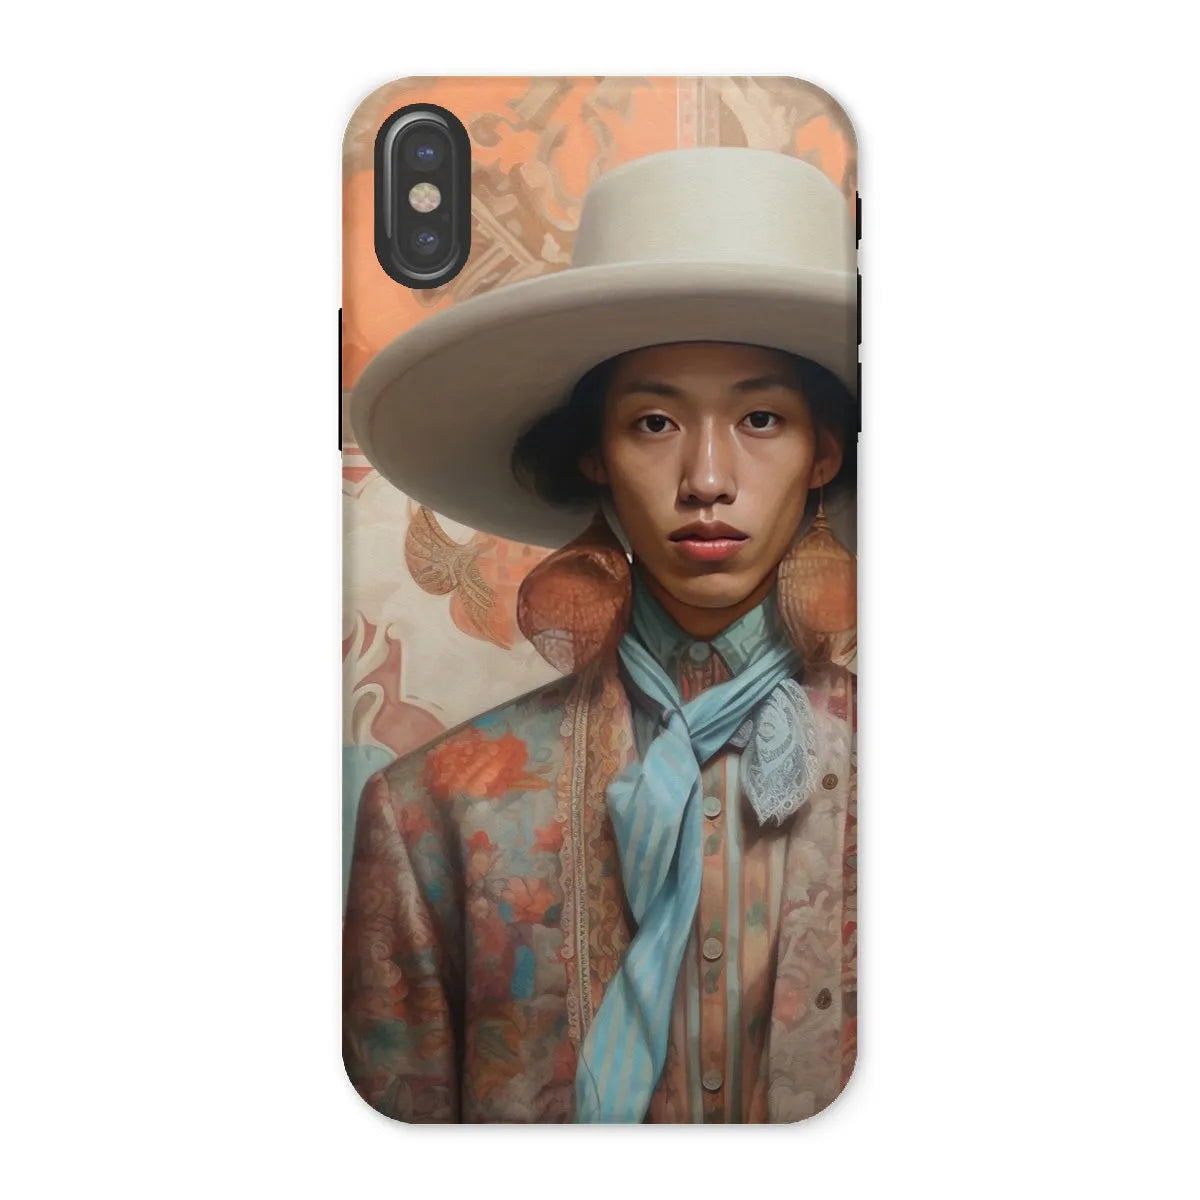 Iyaan - Gay Malay Asian Cowboy Aesthetic Art Phone Case - Iphone x / Matte - Mobile Phone Cases - Aesthetic Art